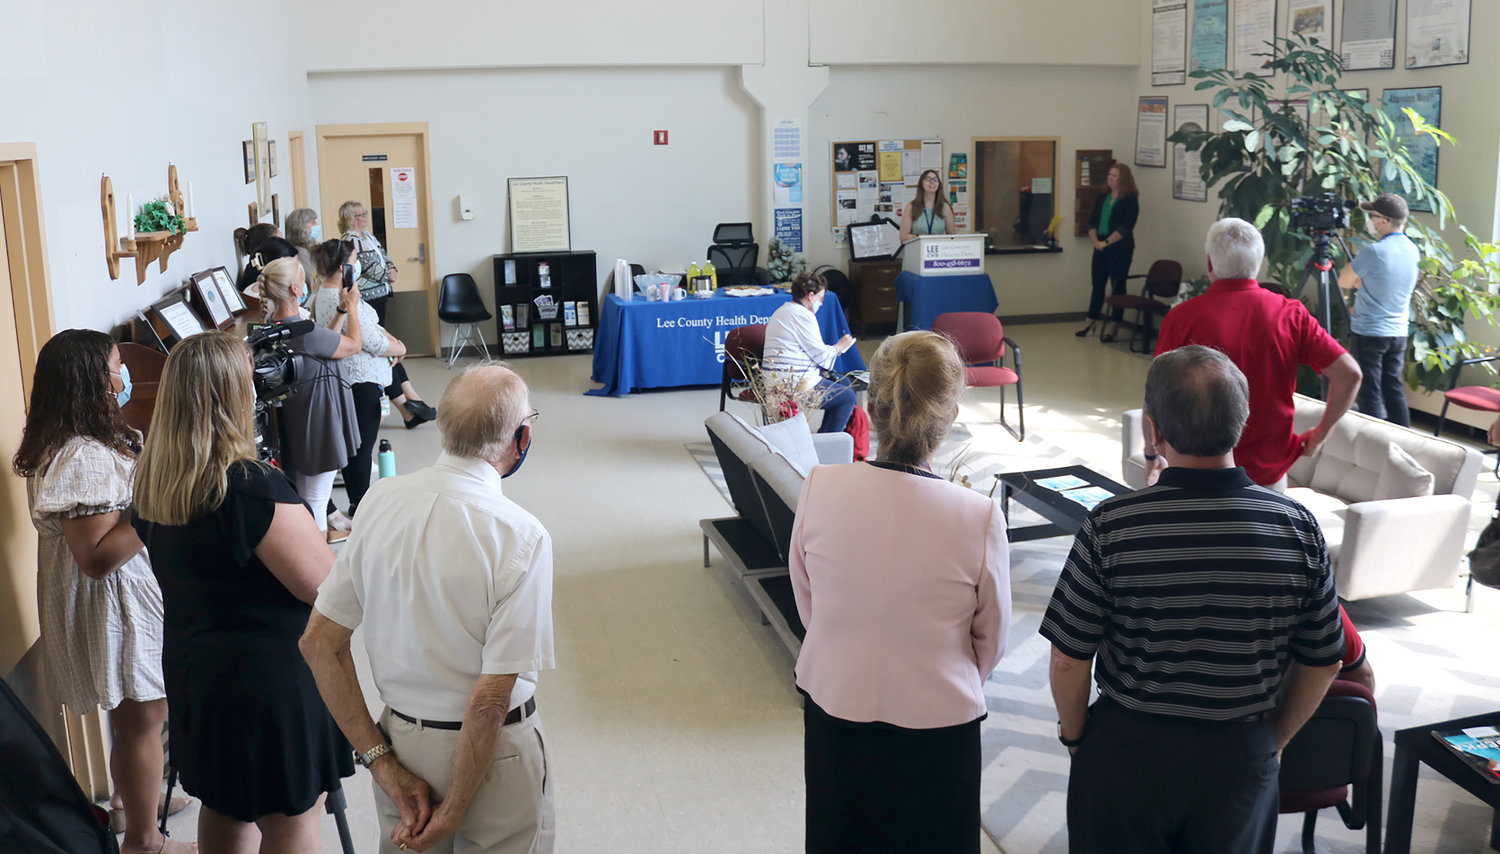 Dignitaries, Lee County Health Department staff, and media gathered at a press conference Thursday to announce a $500,000 federal grant to boost rural healthcare workforce in southeast Iowa.